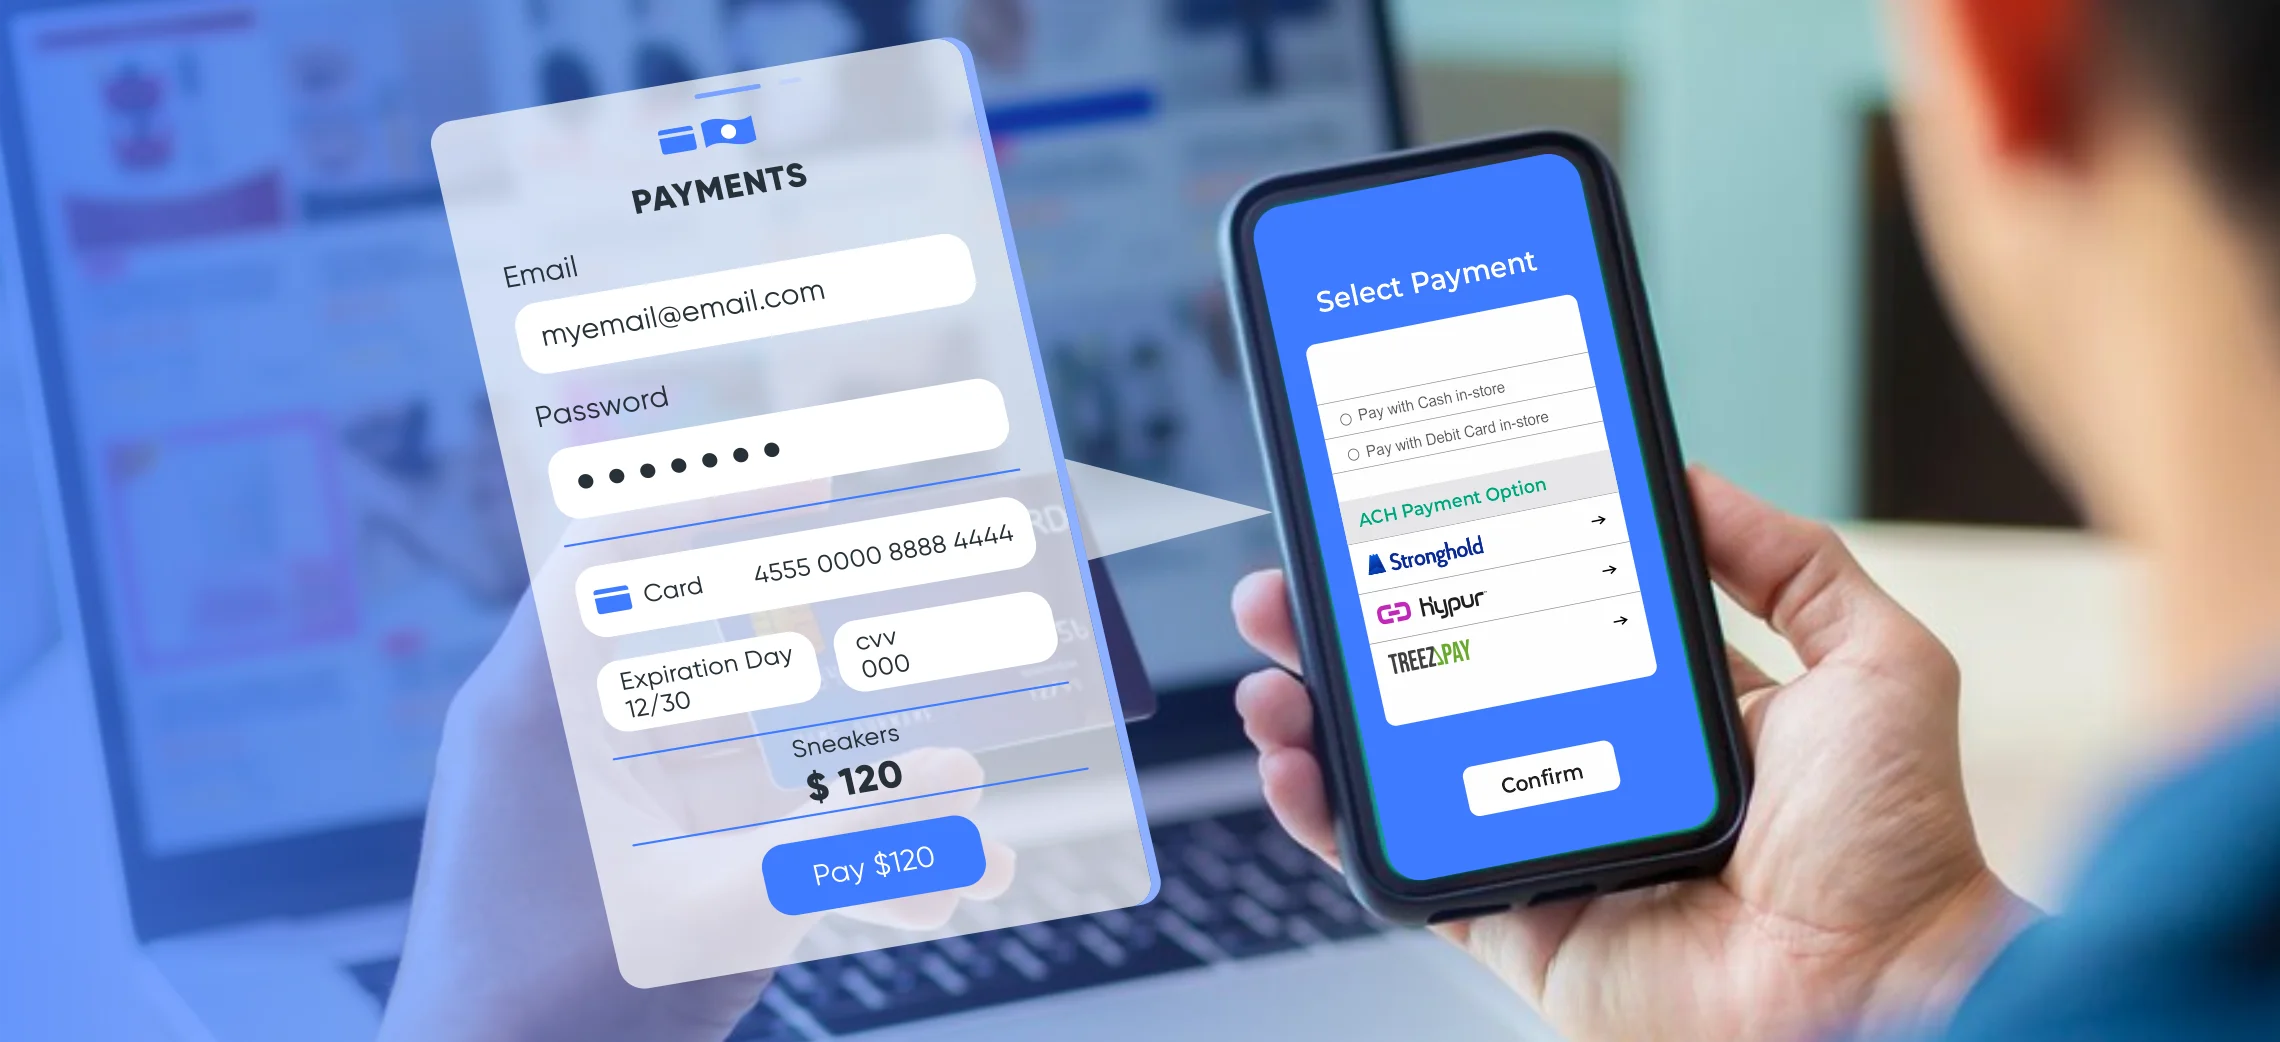 Payments screen on a mobile